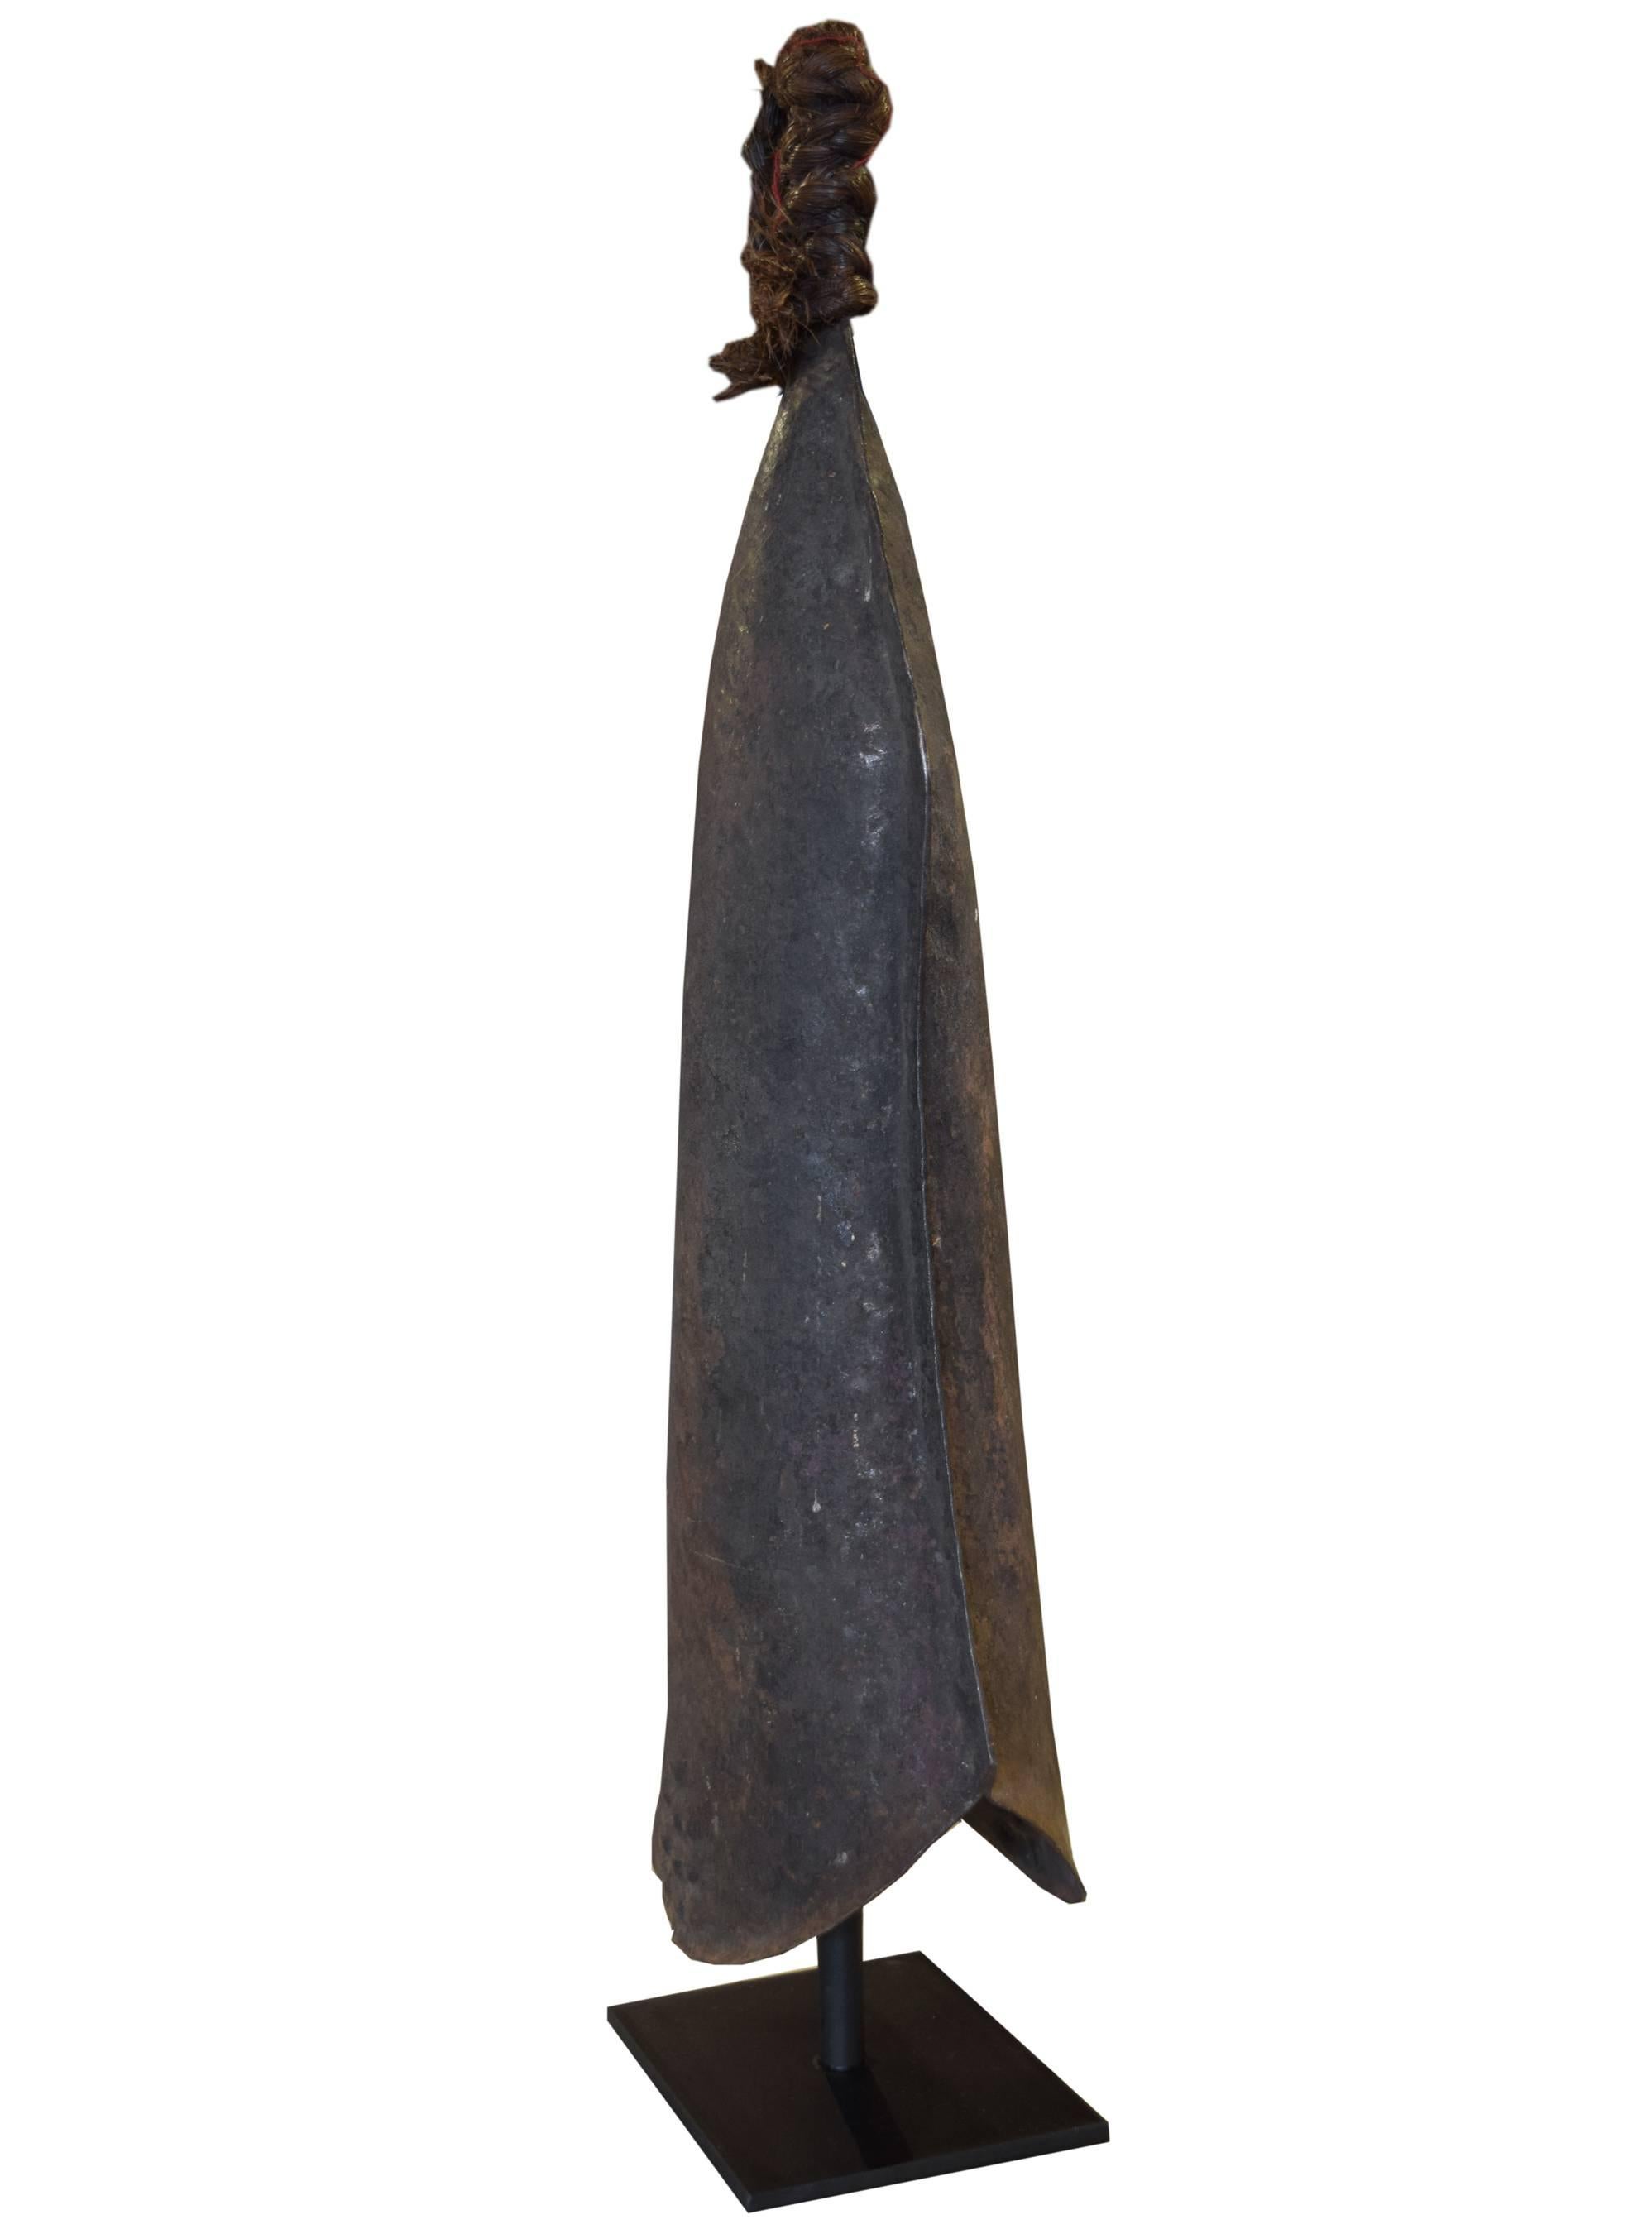 A hammered iron gong made by the blacksmiths of the Tetela & Onga peoples from the Congo. Gongs were important ritual instruments and symbols of authority. They were highly valued and thus used as currency for goods and even wives.